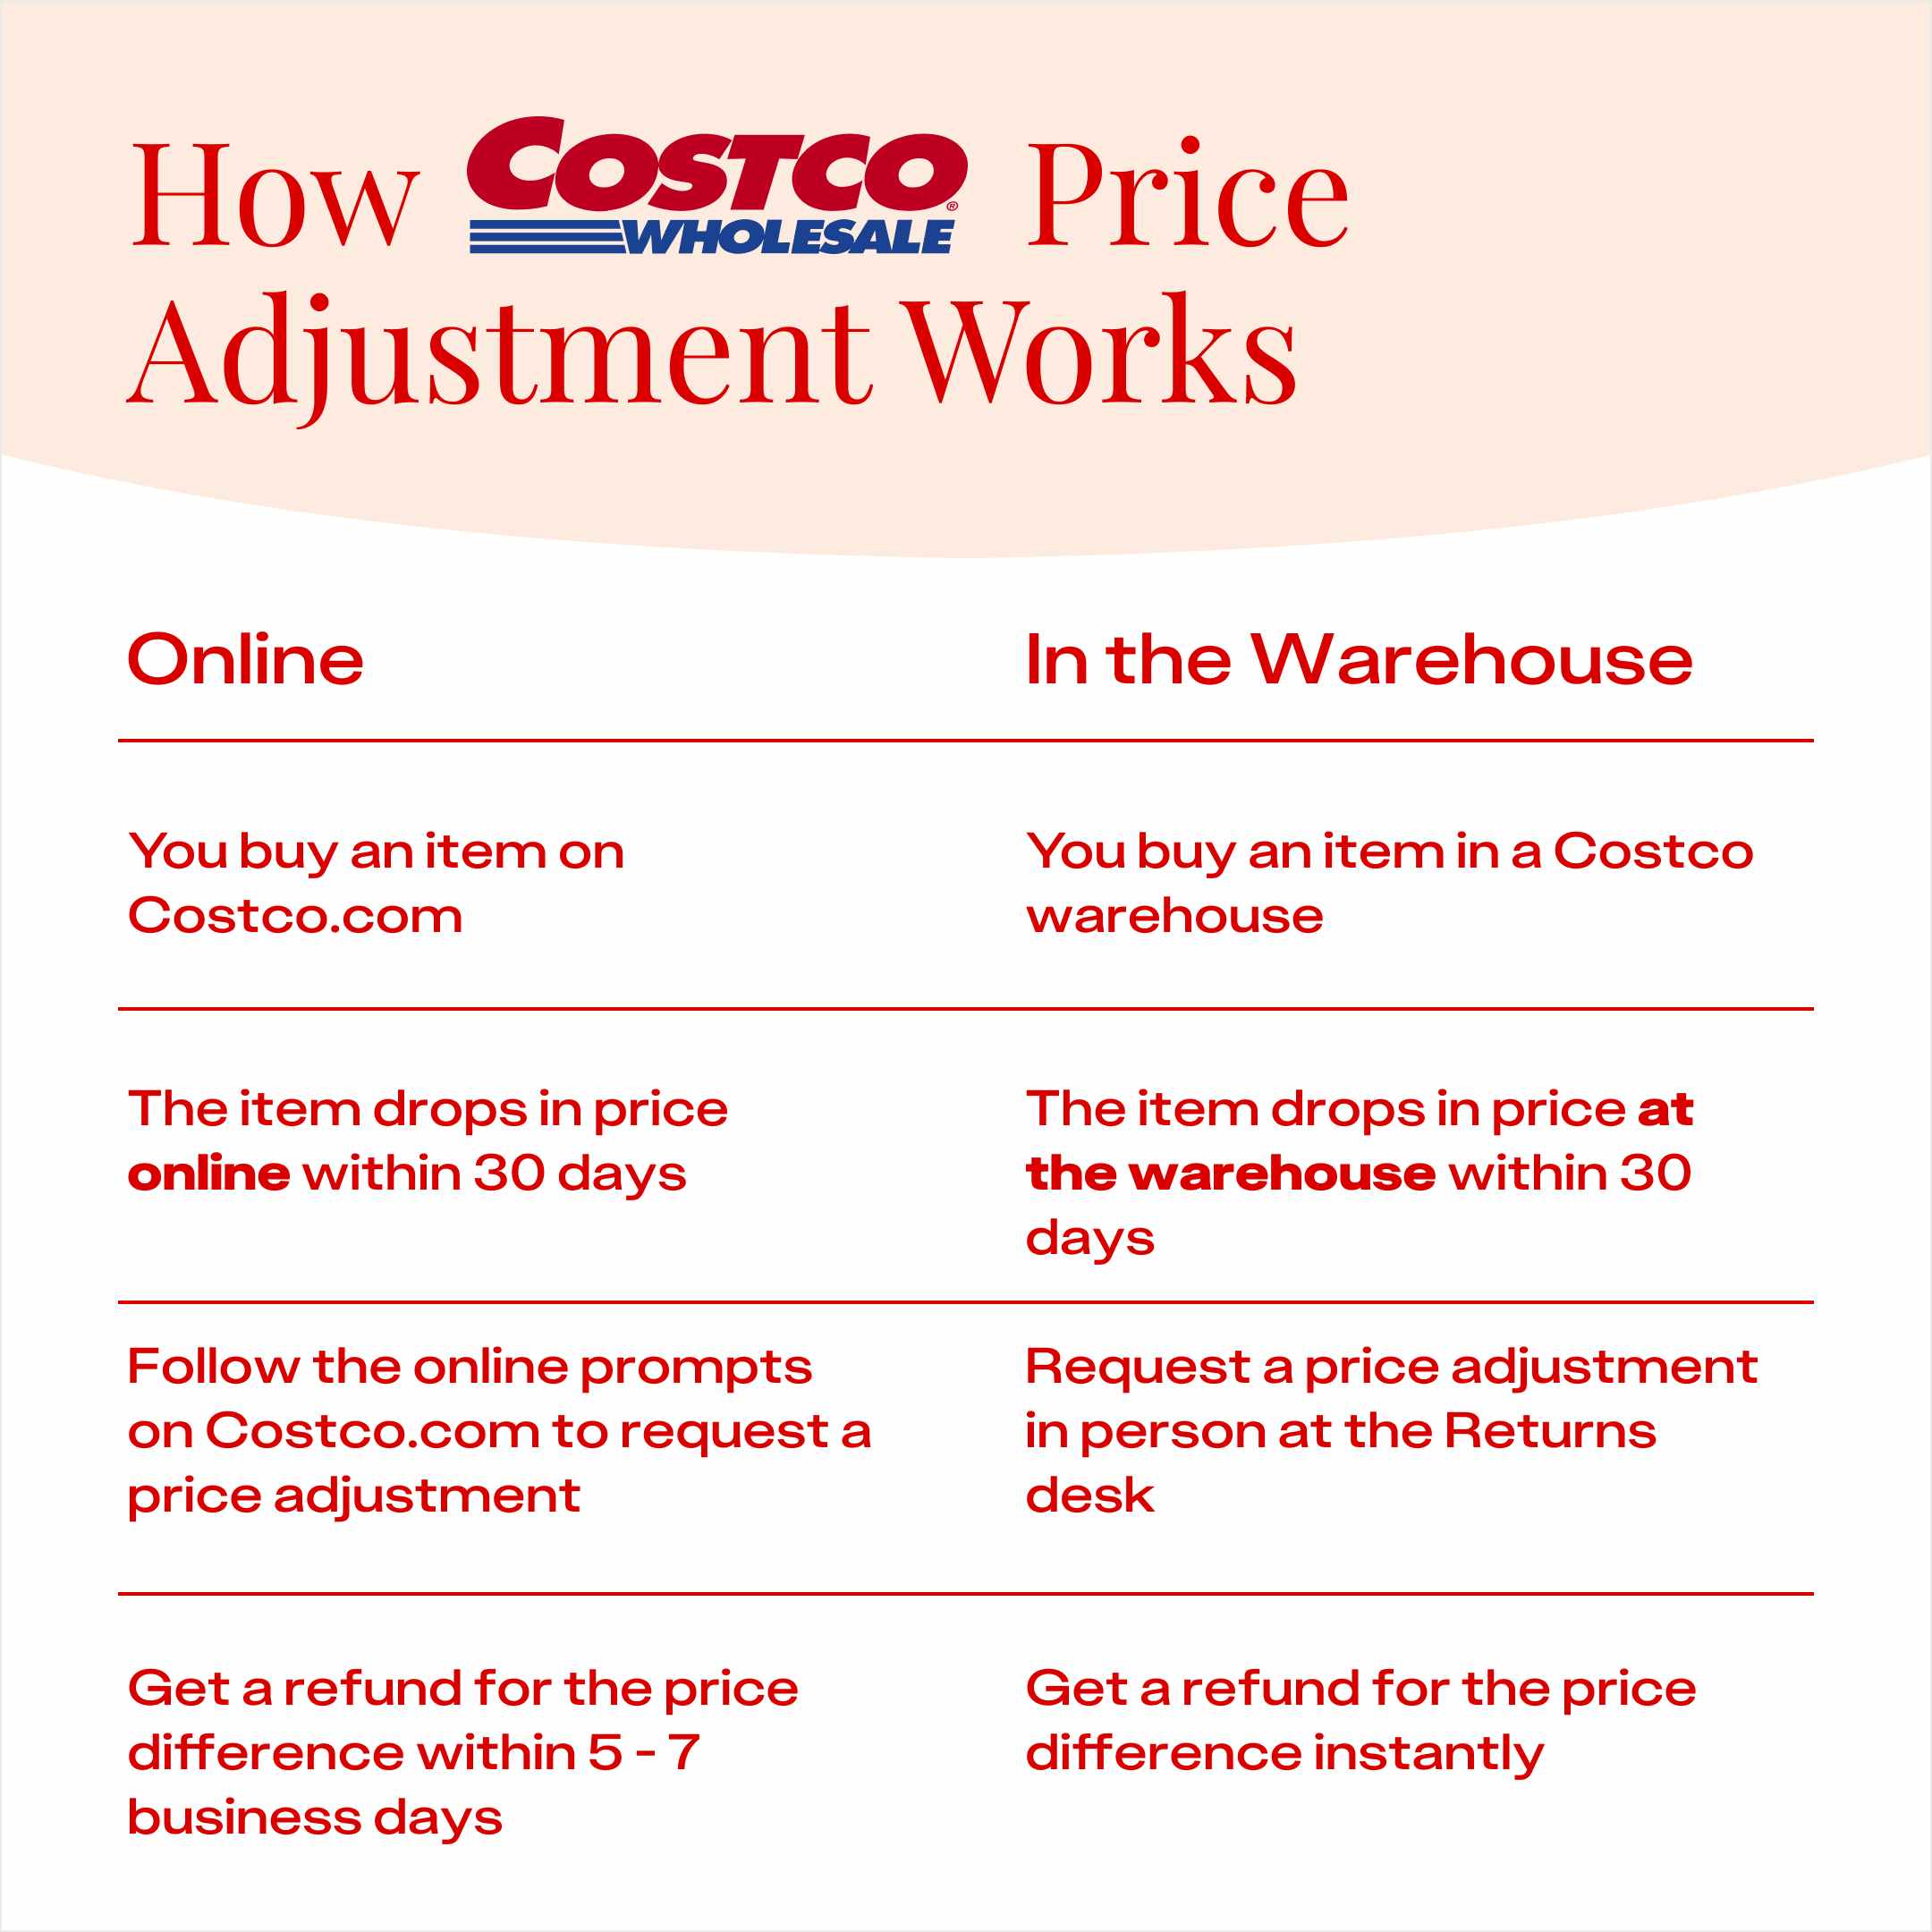 How to request a Costco price adjustment online versus in the warehouse